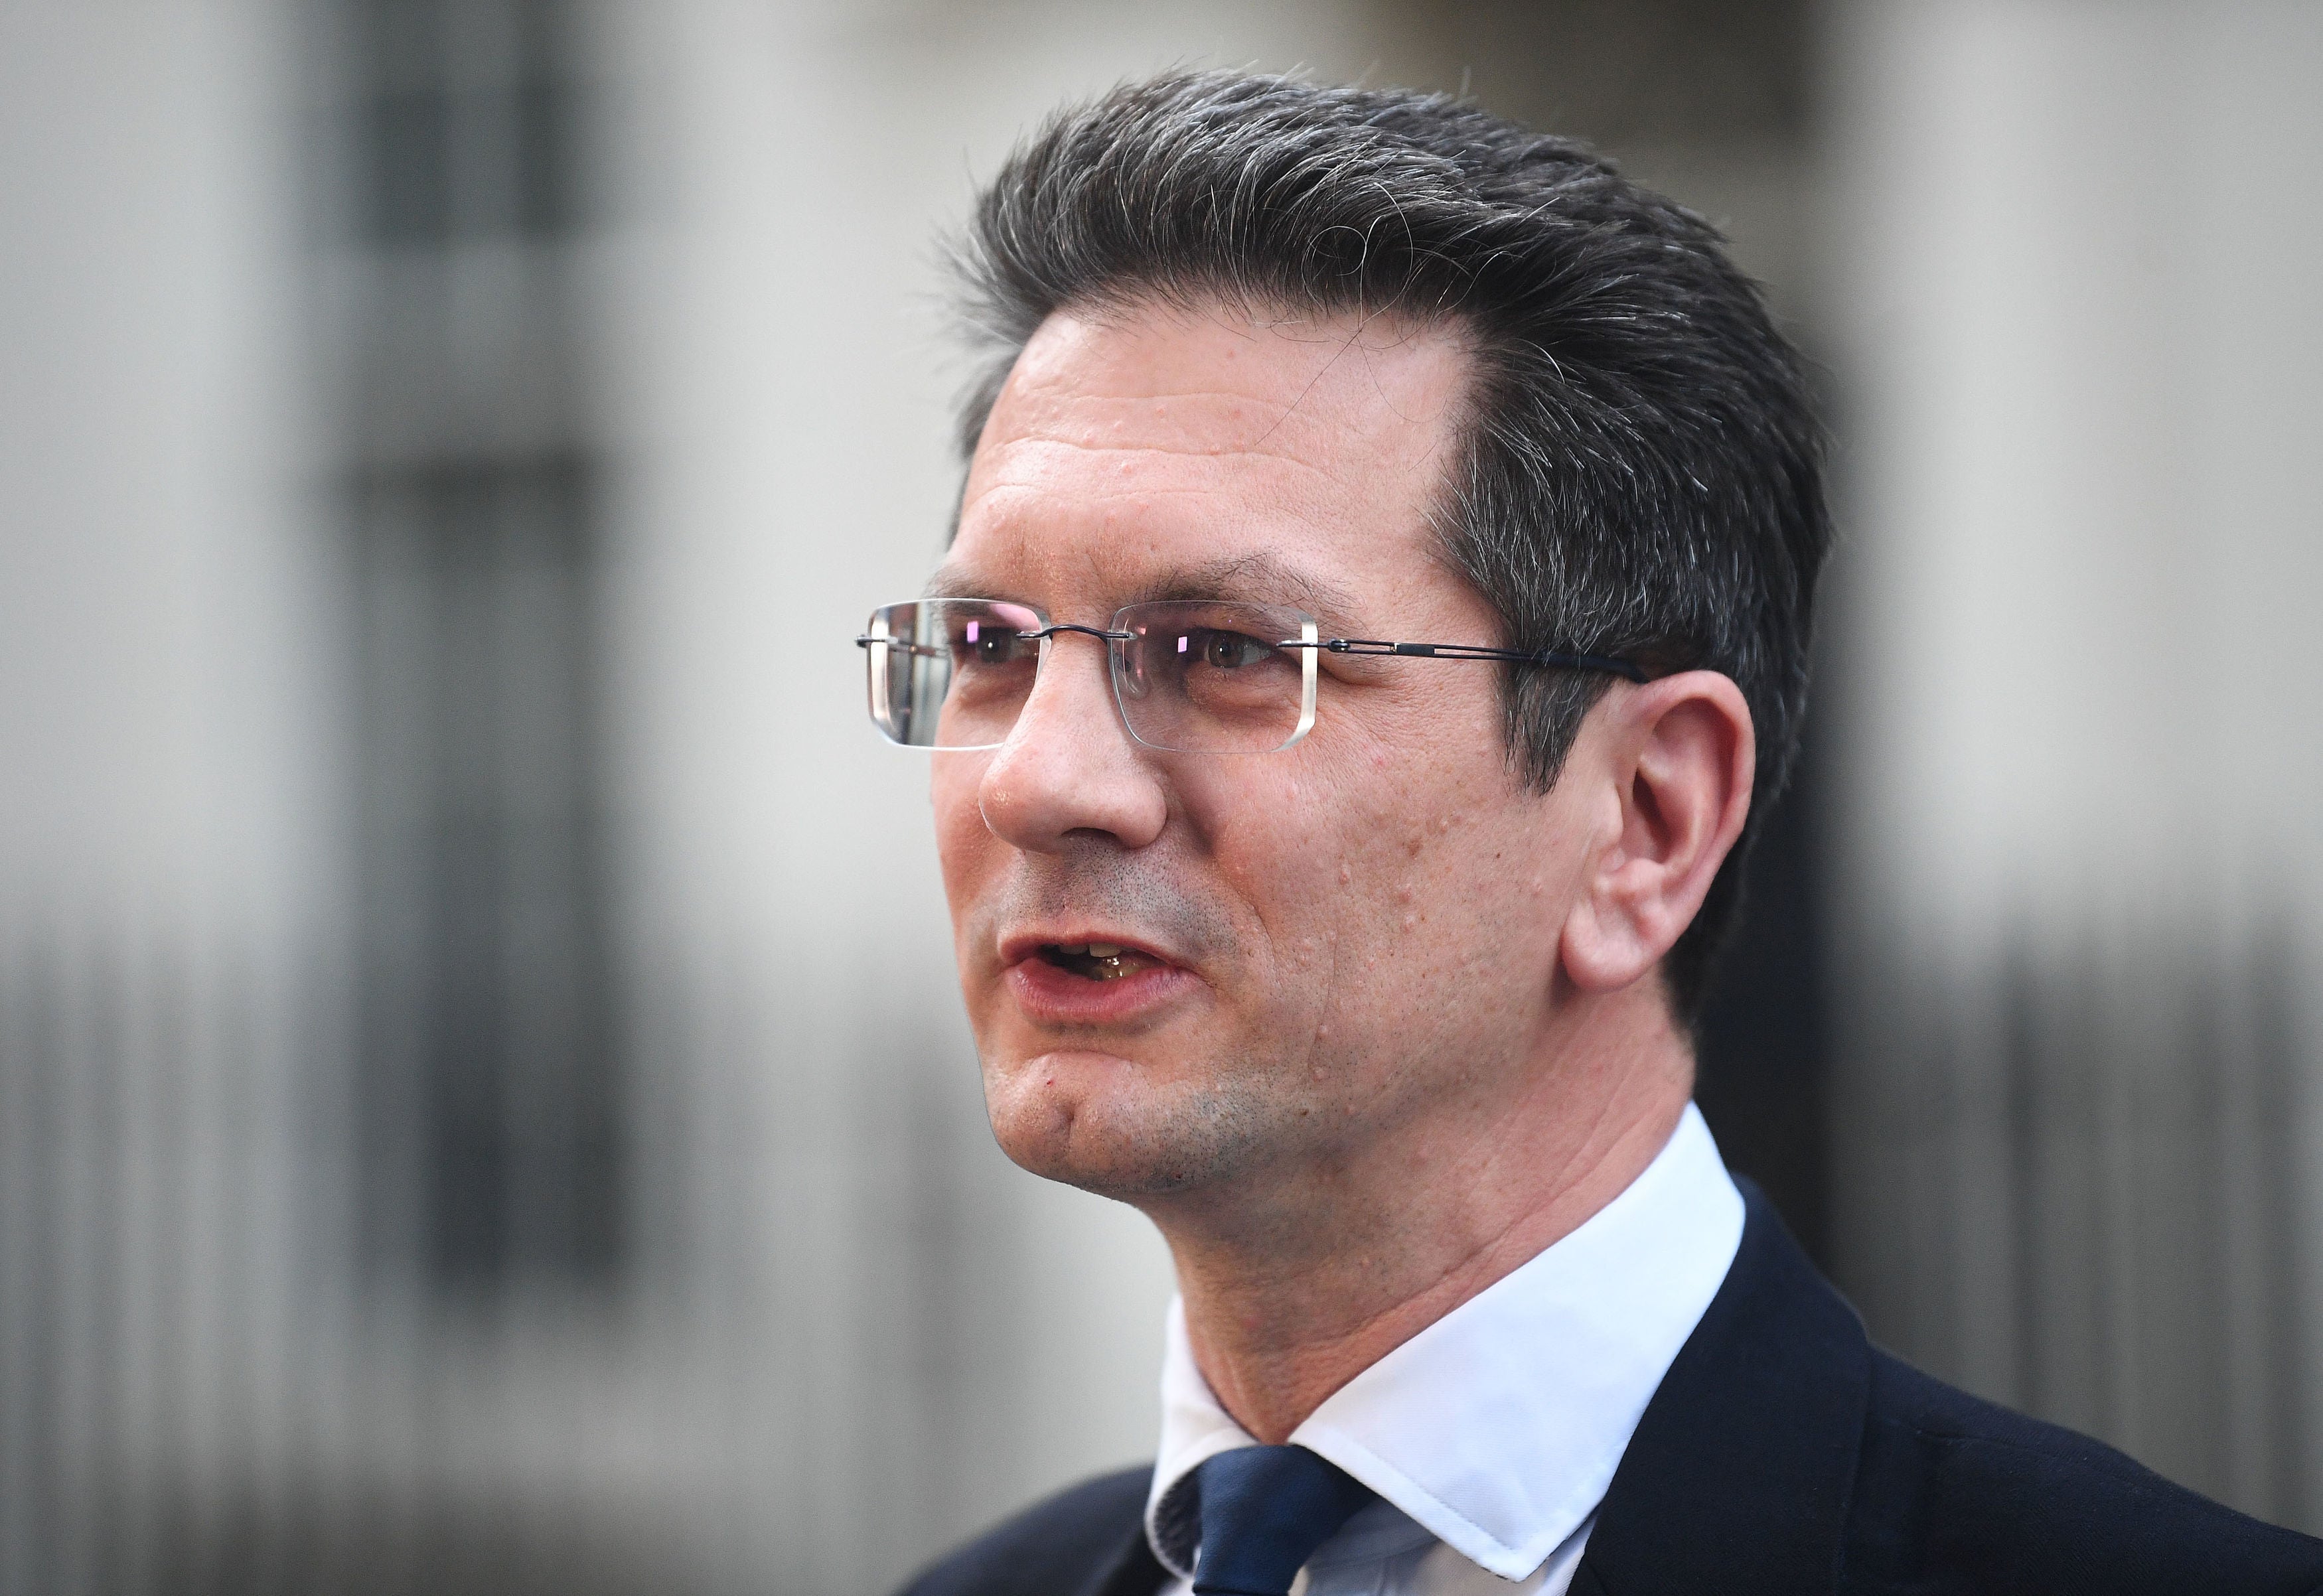 Steve Baker, vice chair of the Covid Recovery Group, is a leading lockdown sceptic and thorn in the prime minister’s side